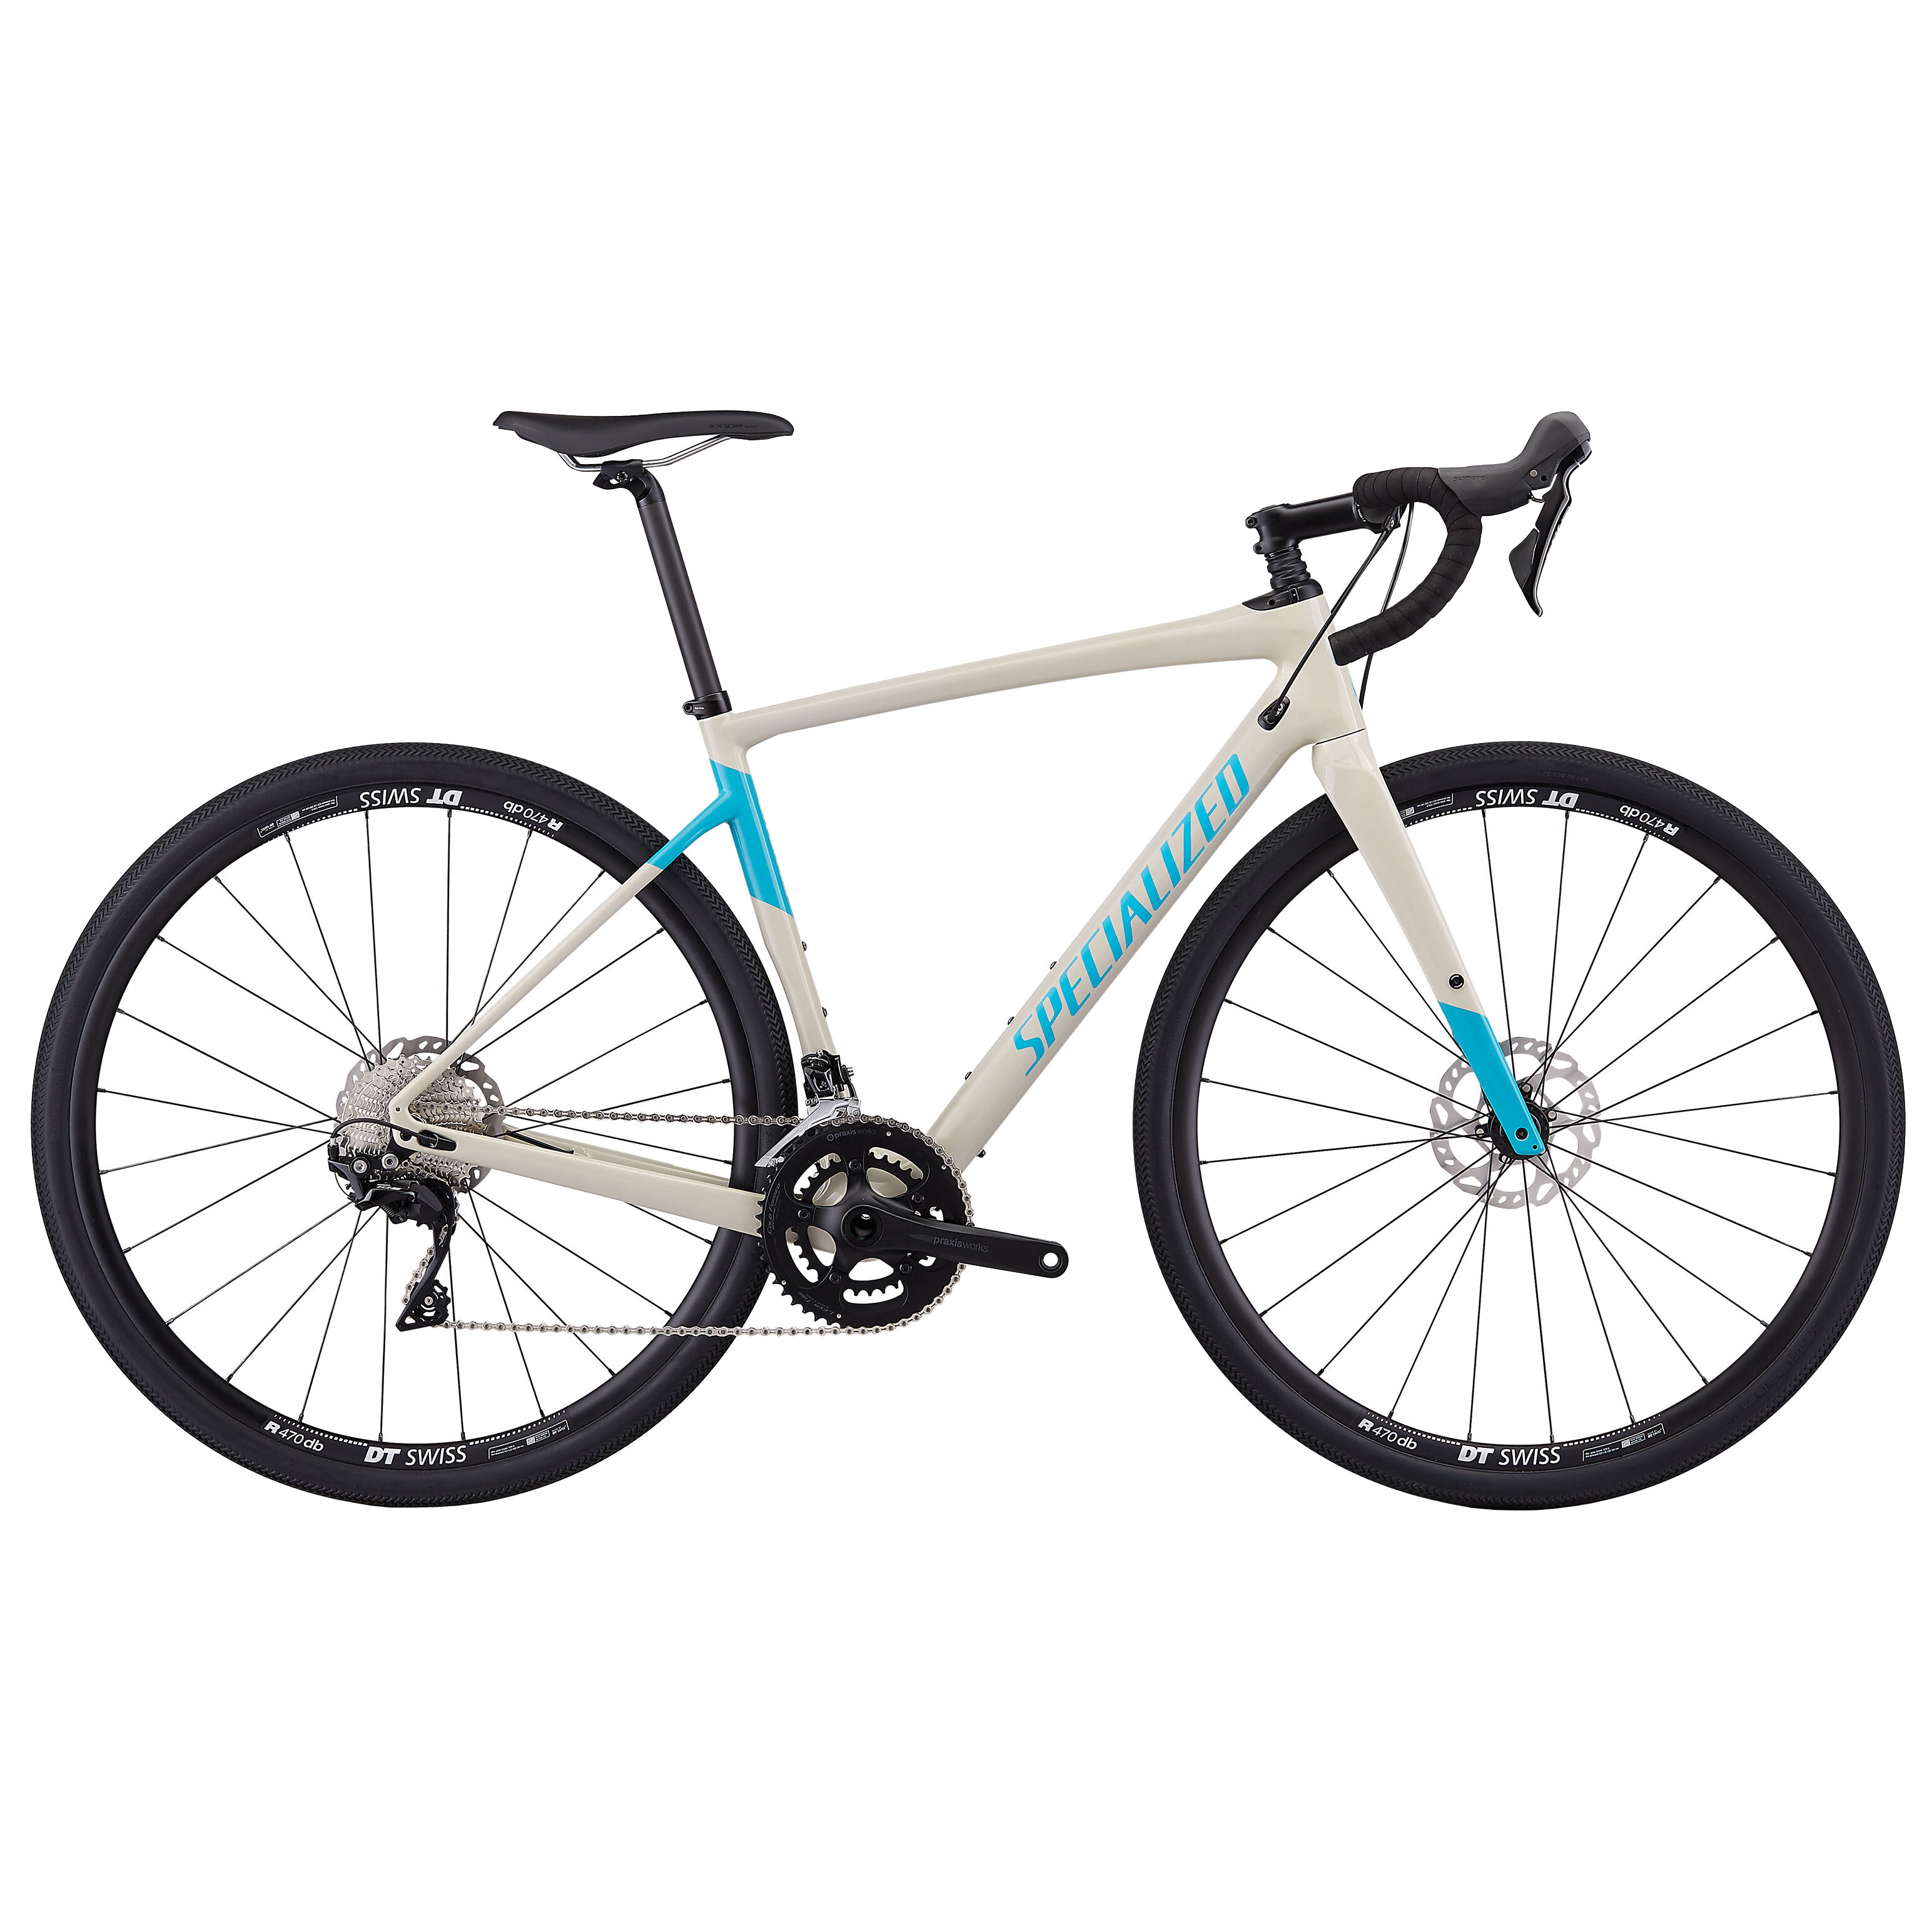 Specialized Diverge Sport Carbon bicycle LordGun online bike store